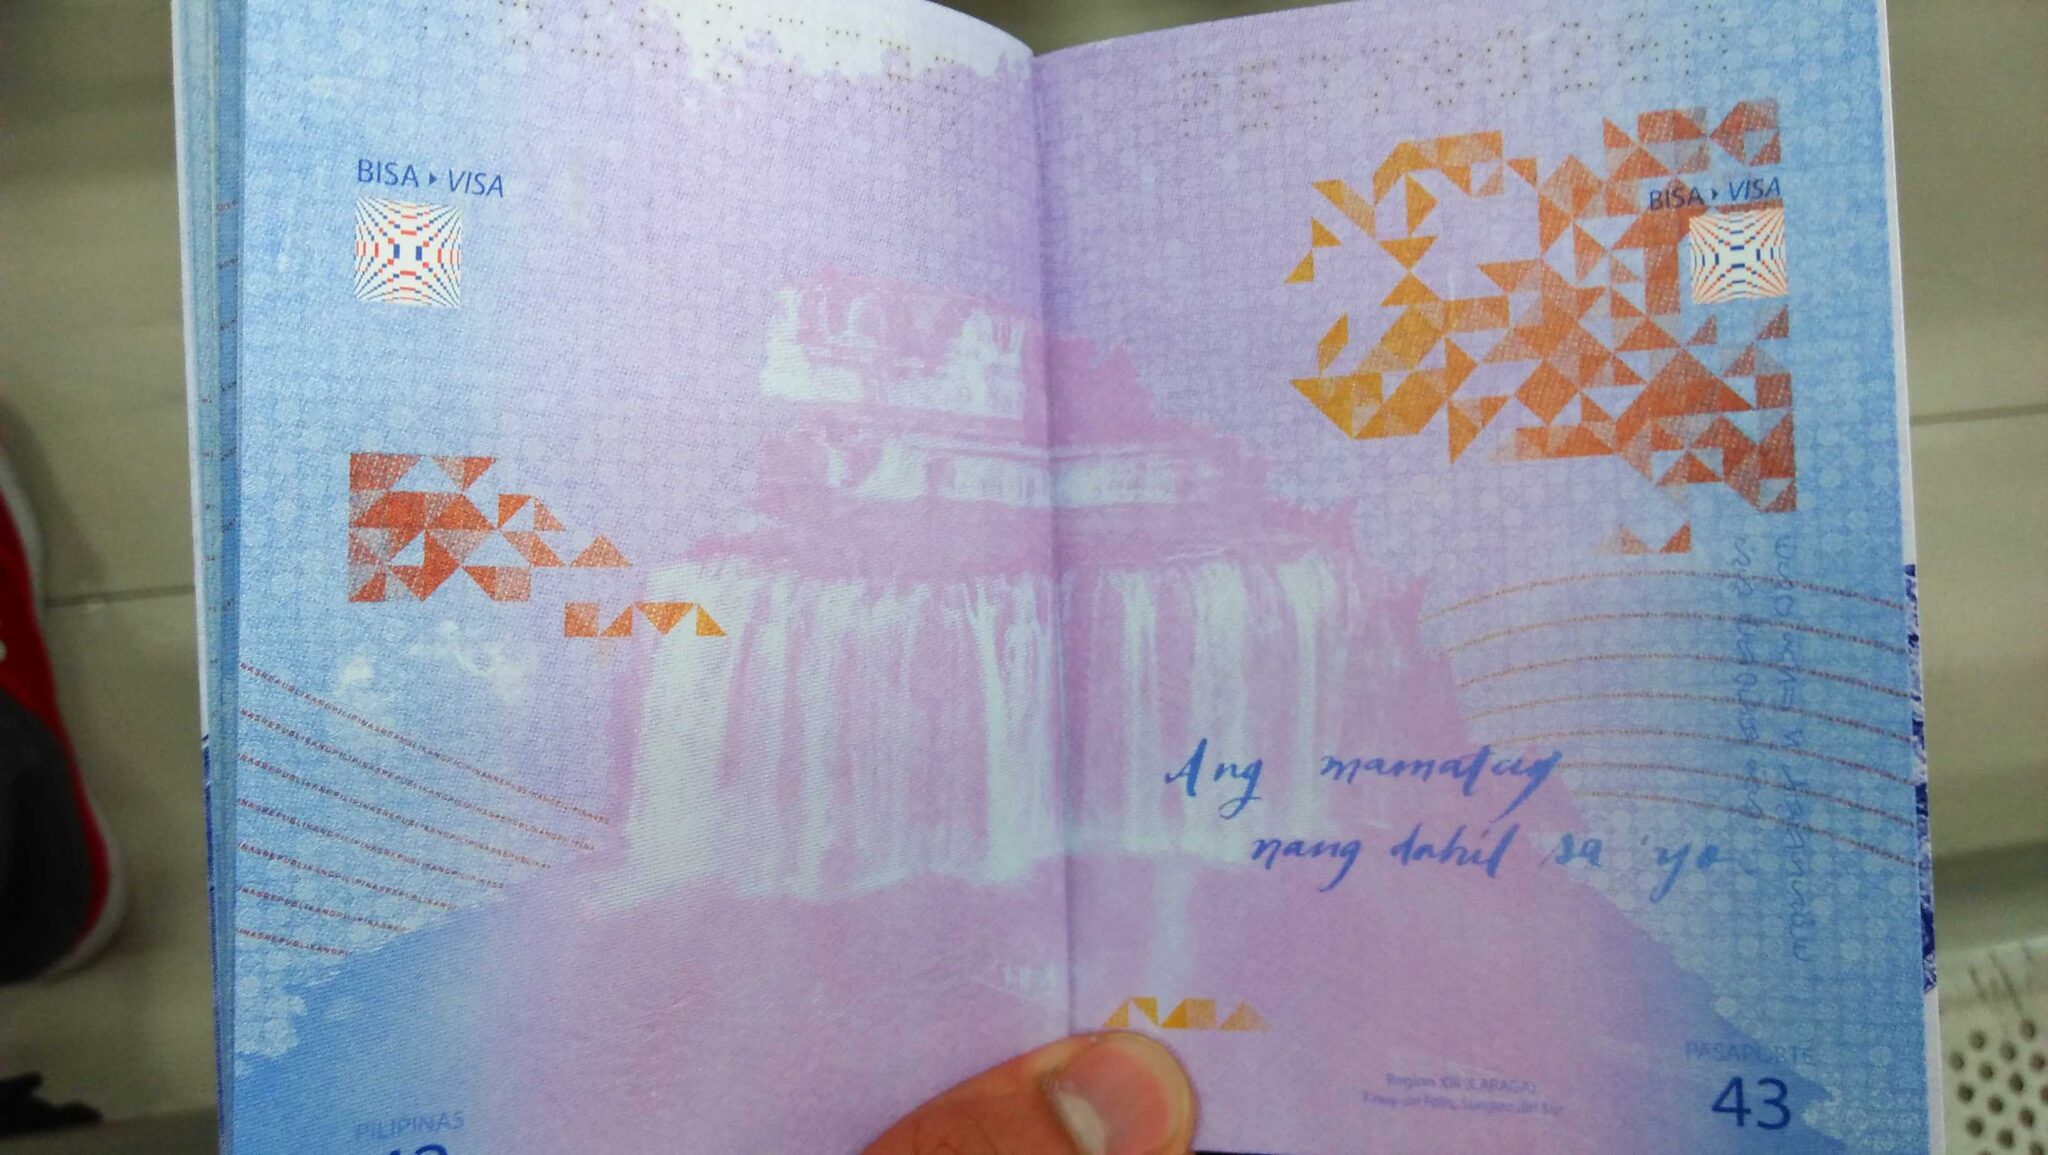 Scrolling through the 43rd page of a seaman's passport.